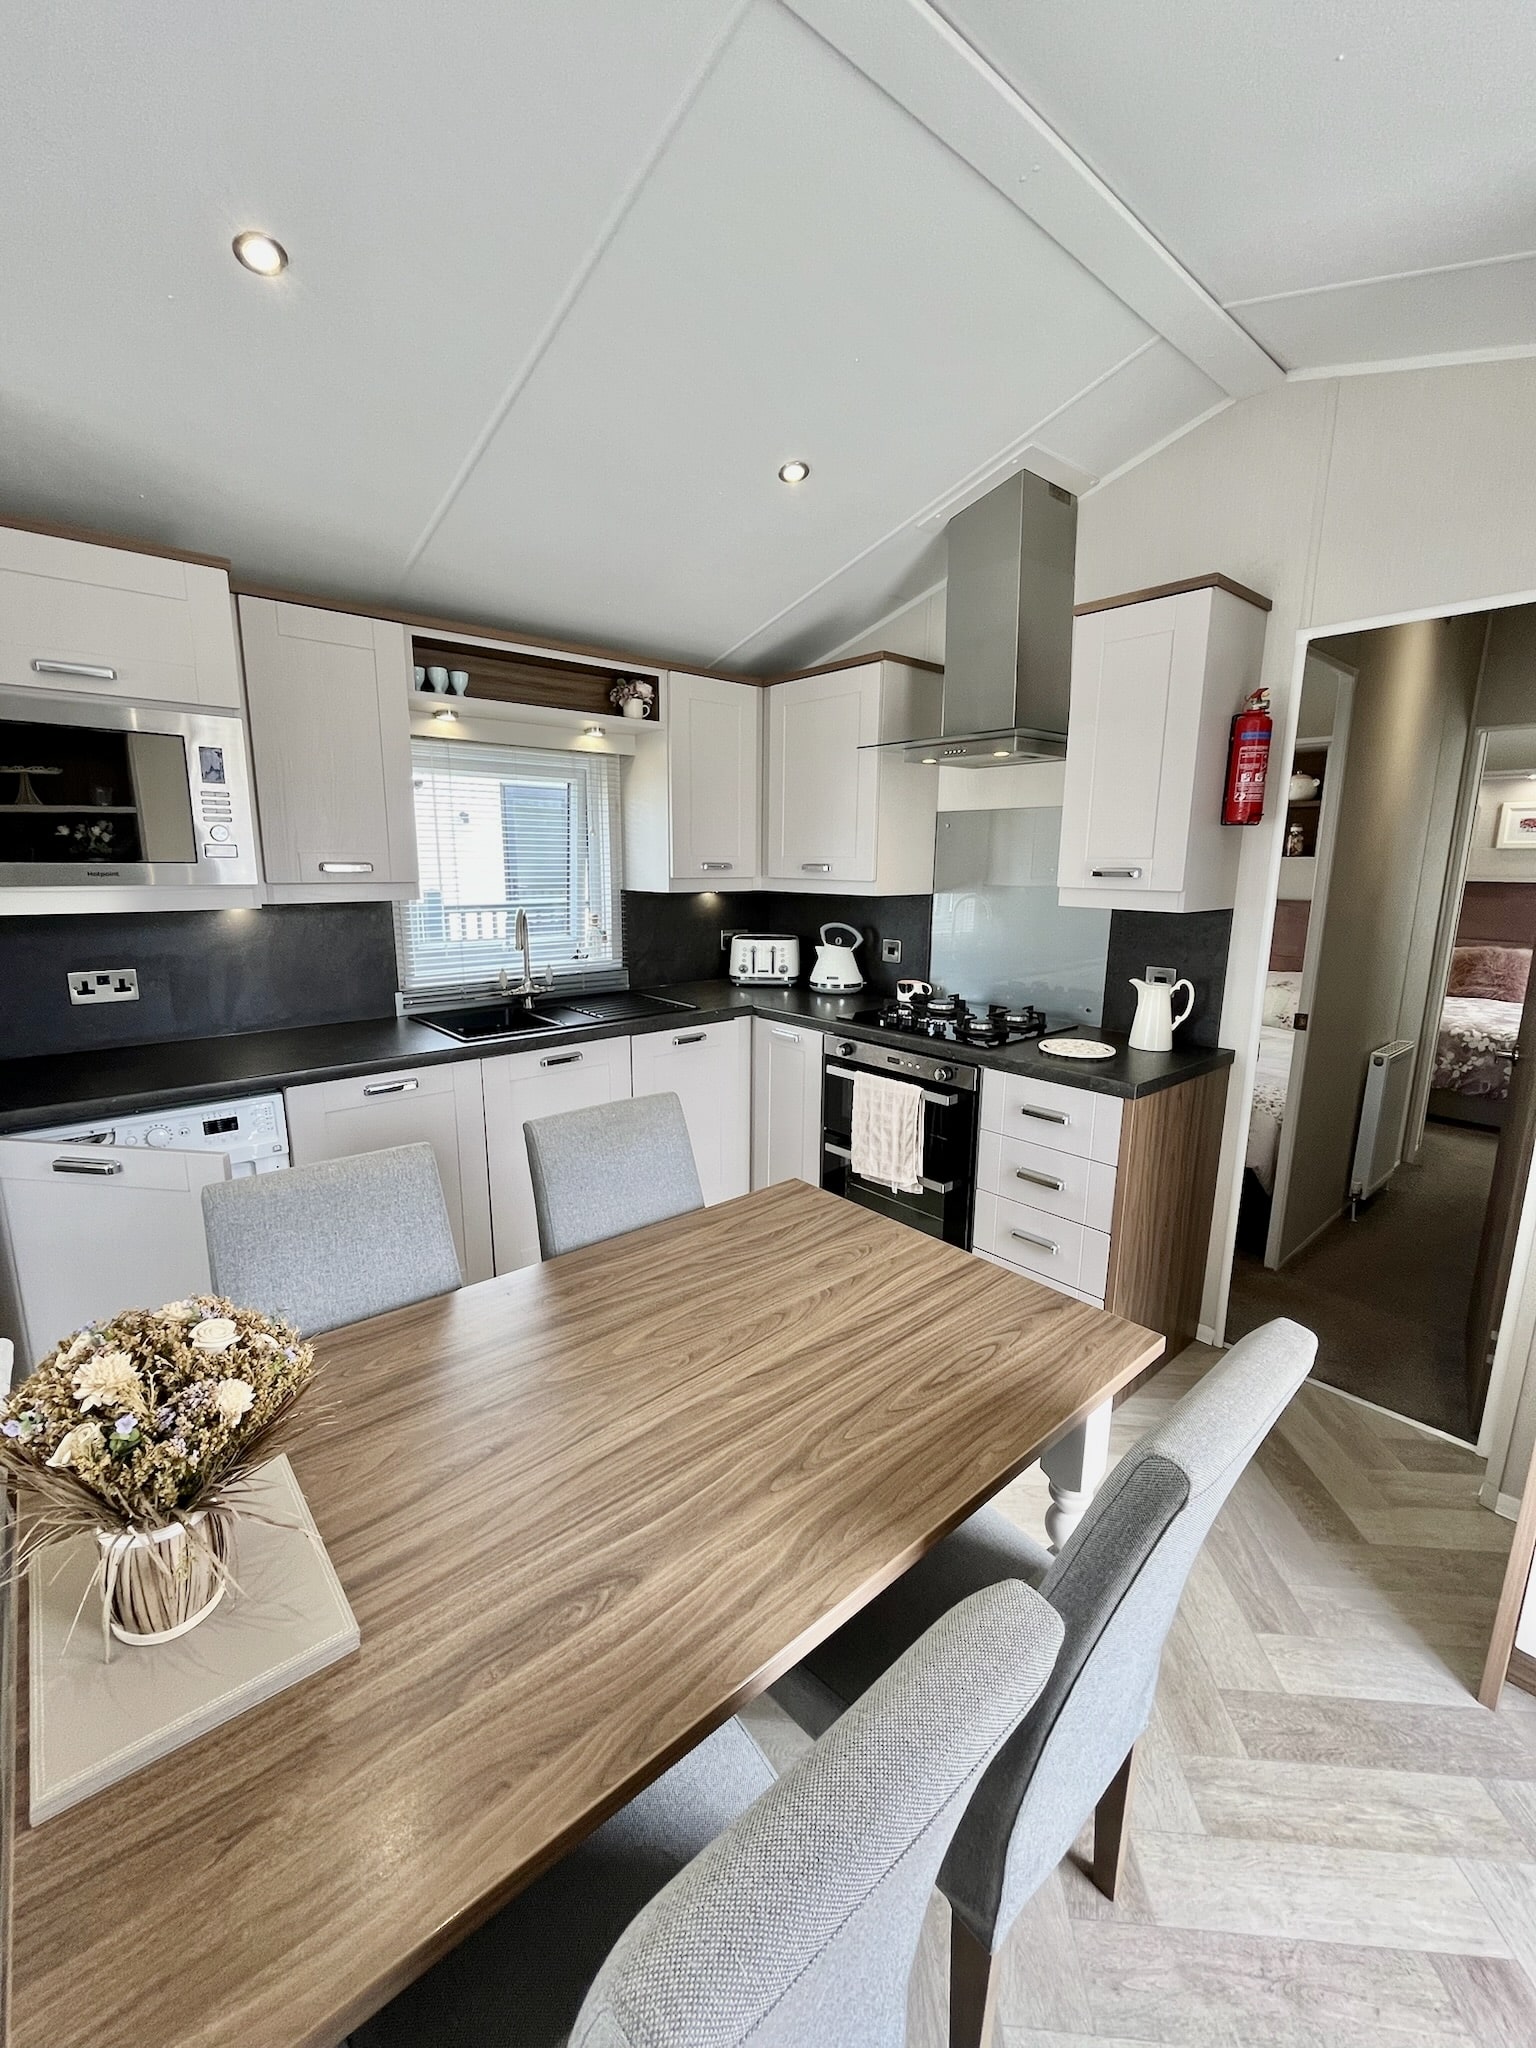 2021 Willerby Sheraton Lodge for sale at Pentire Coastal Holiday Park, Bude